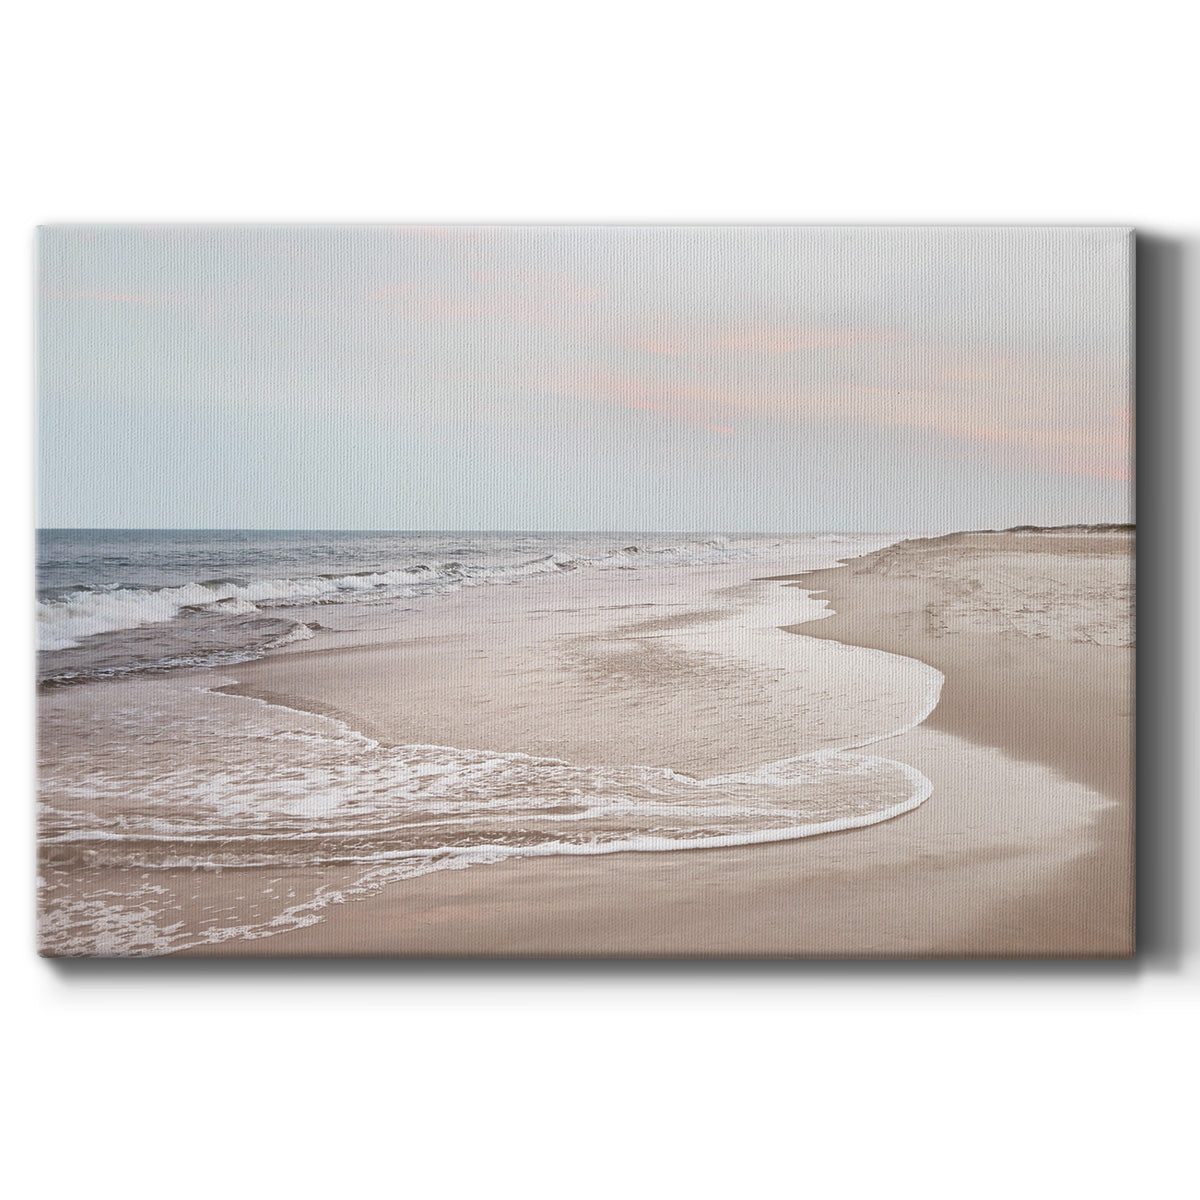 Corolla Soft Shore Premium Gallery Wrapped Canvas - Ready to Hang